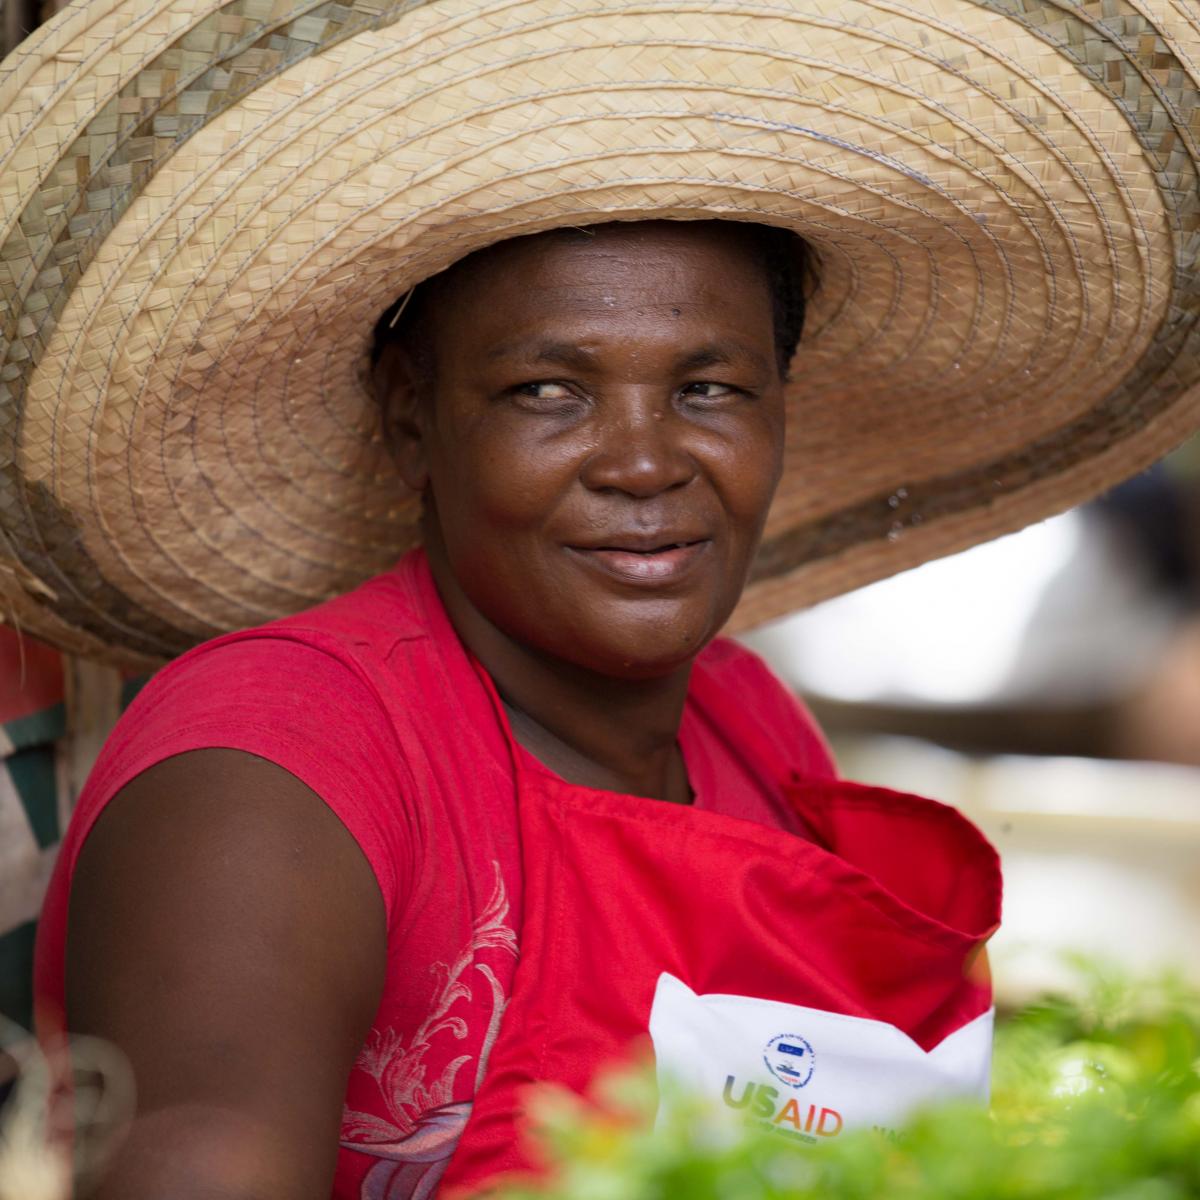 Christela, a vendor with the Kore Lavi voucher program, sells produce at her market stall